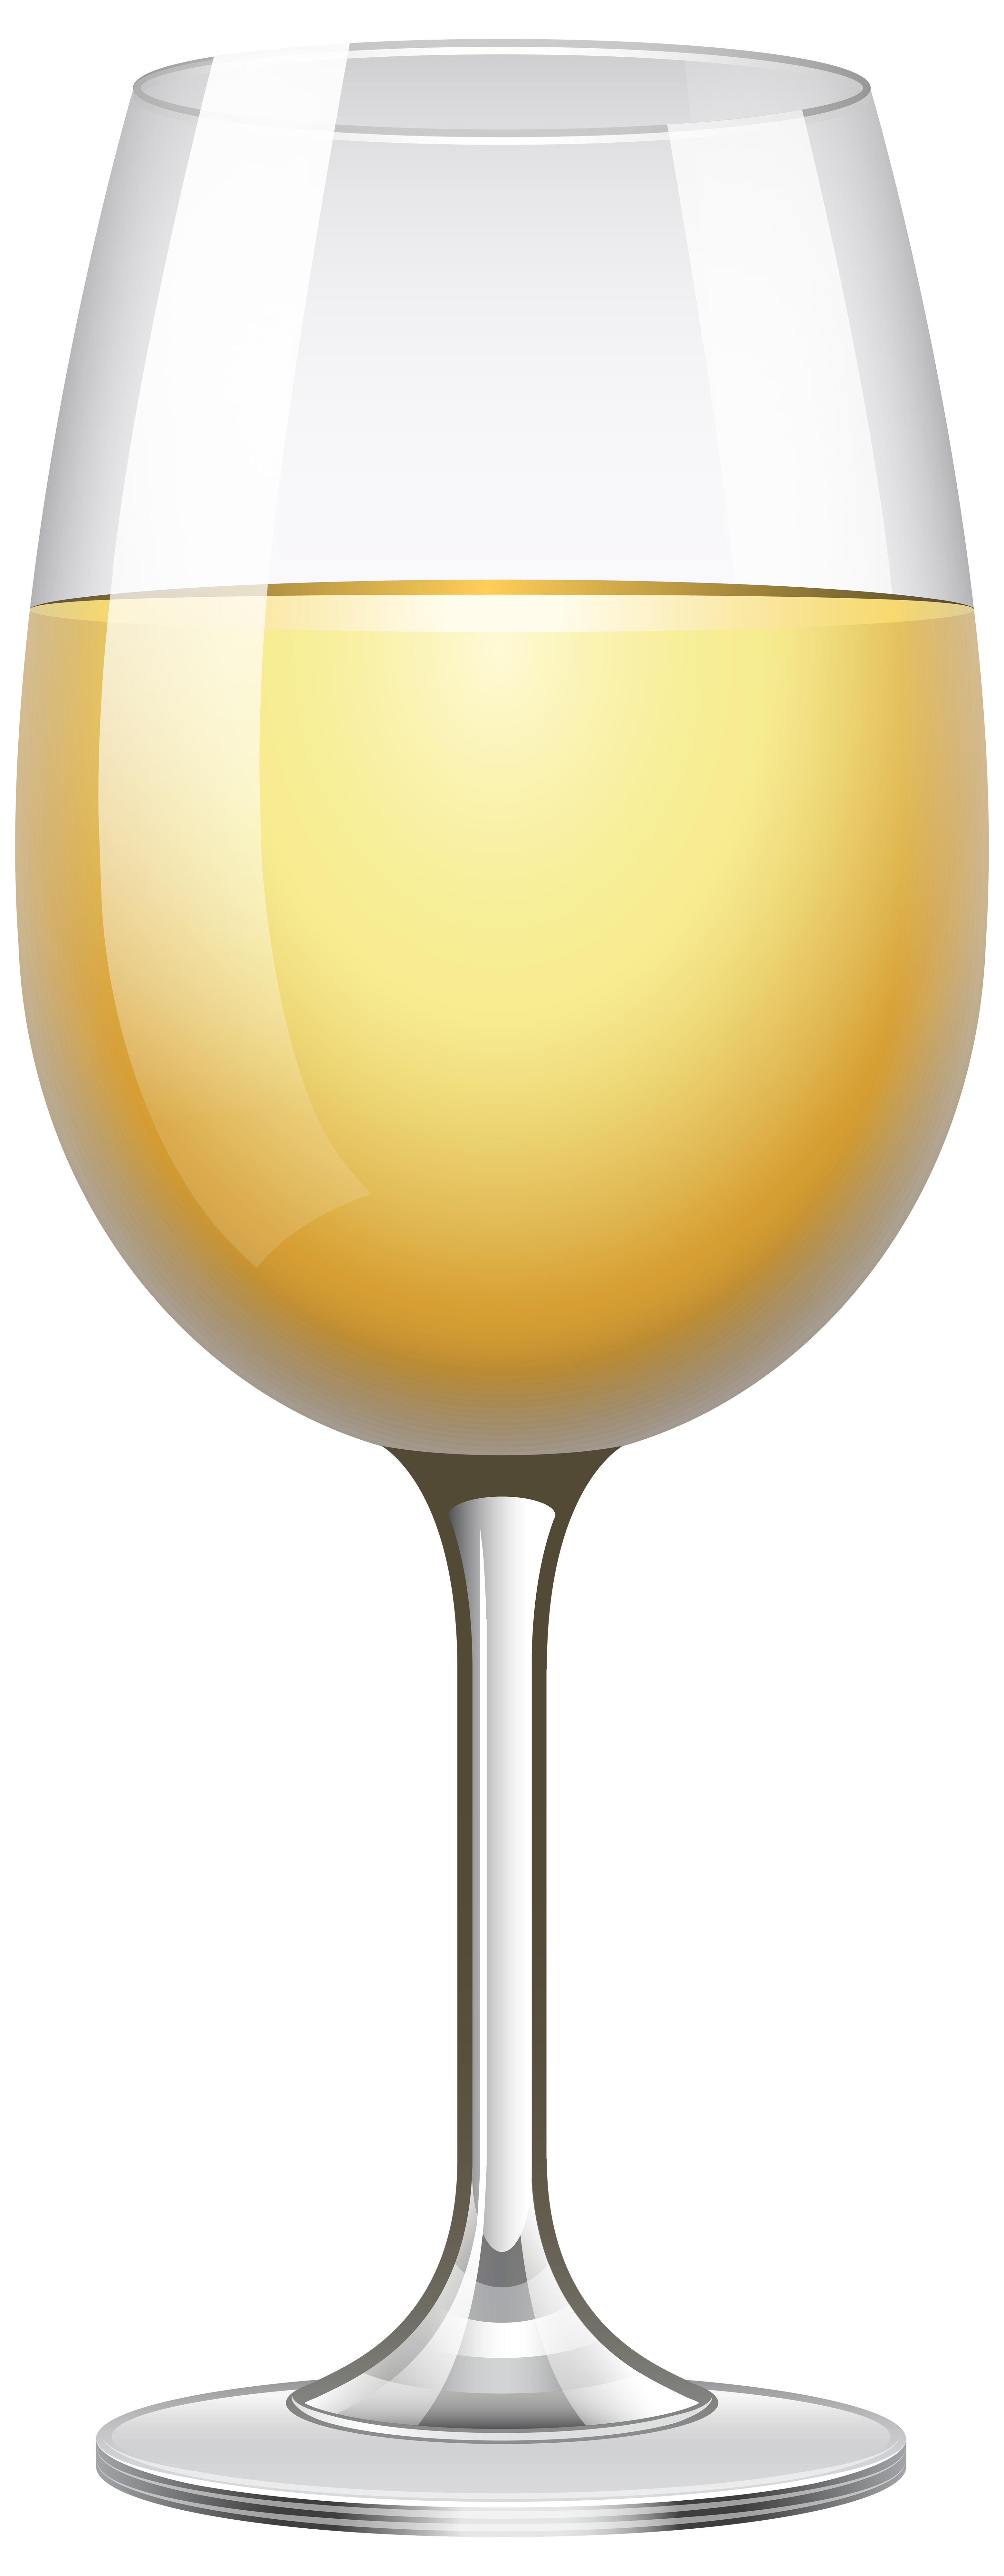 clipart wine glasses and bottles - photo #14